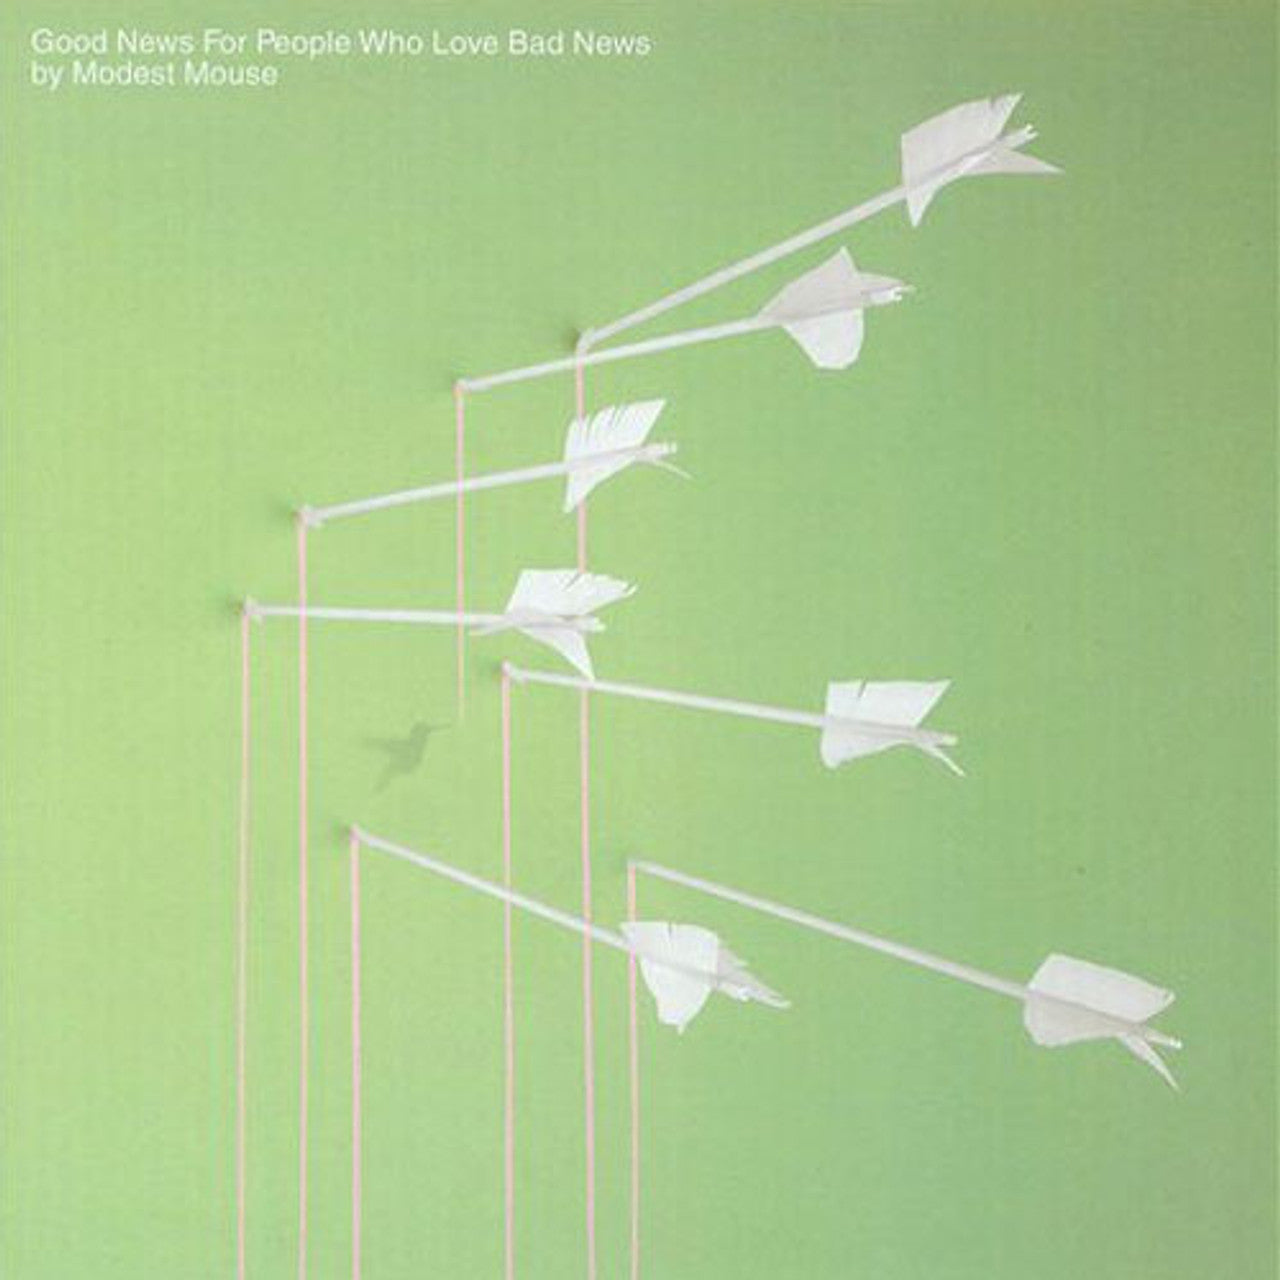 Modest Mouse "Good News for People Who Love Bad News" 2x12" Vinyl